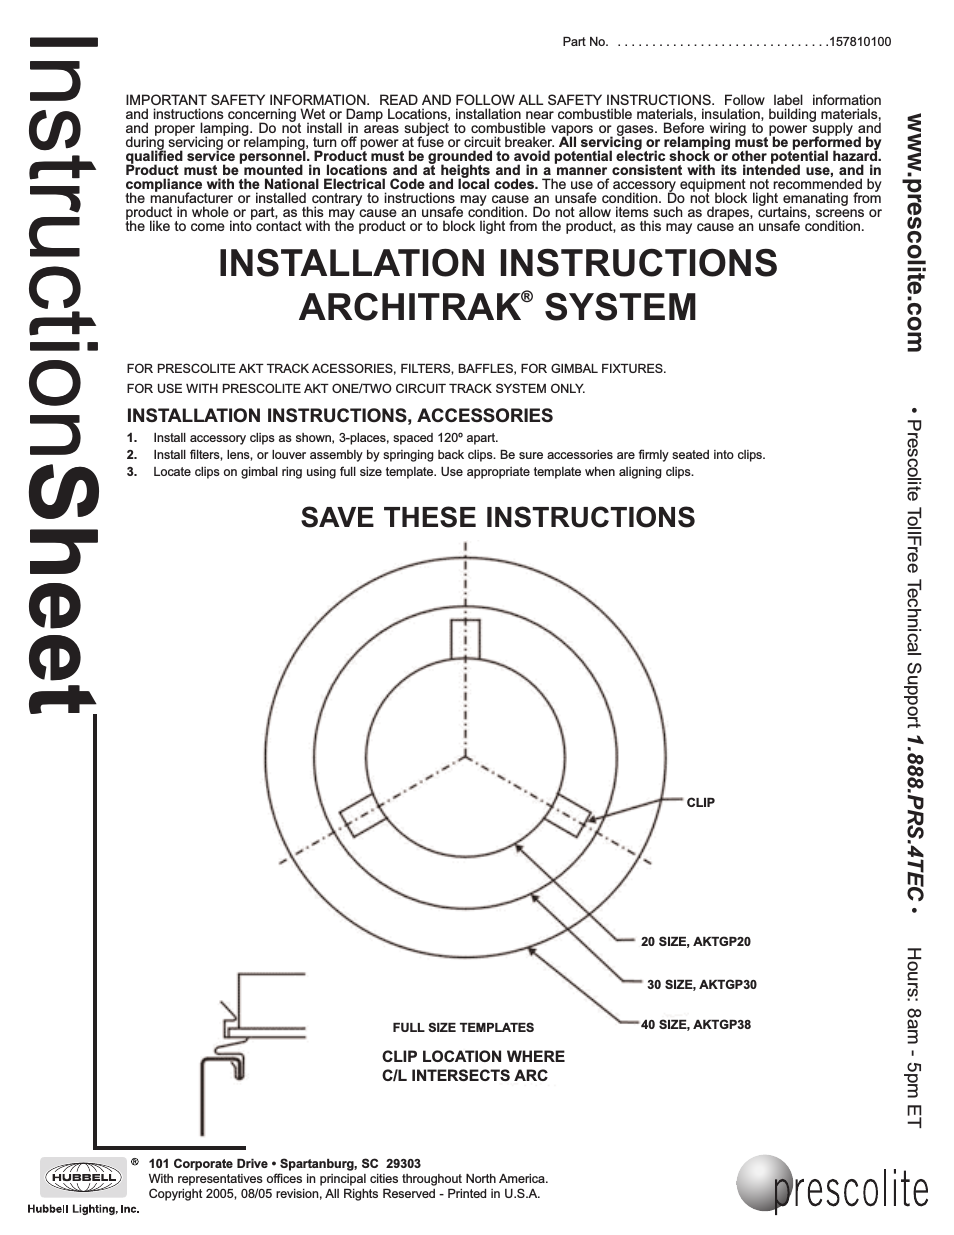 ARCHITRAK SYSTEM Track Accessories, Filters, & Baffles for Gimbal Fixtures